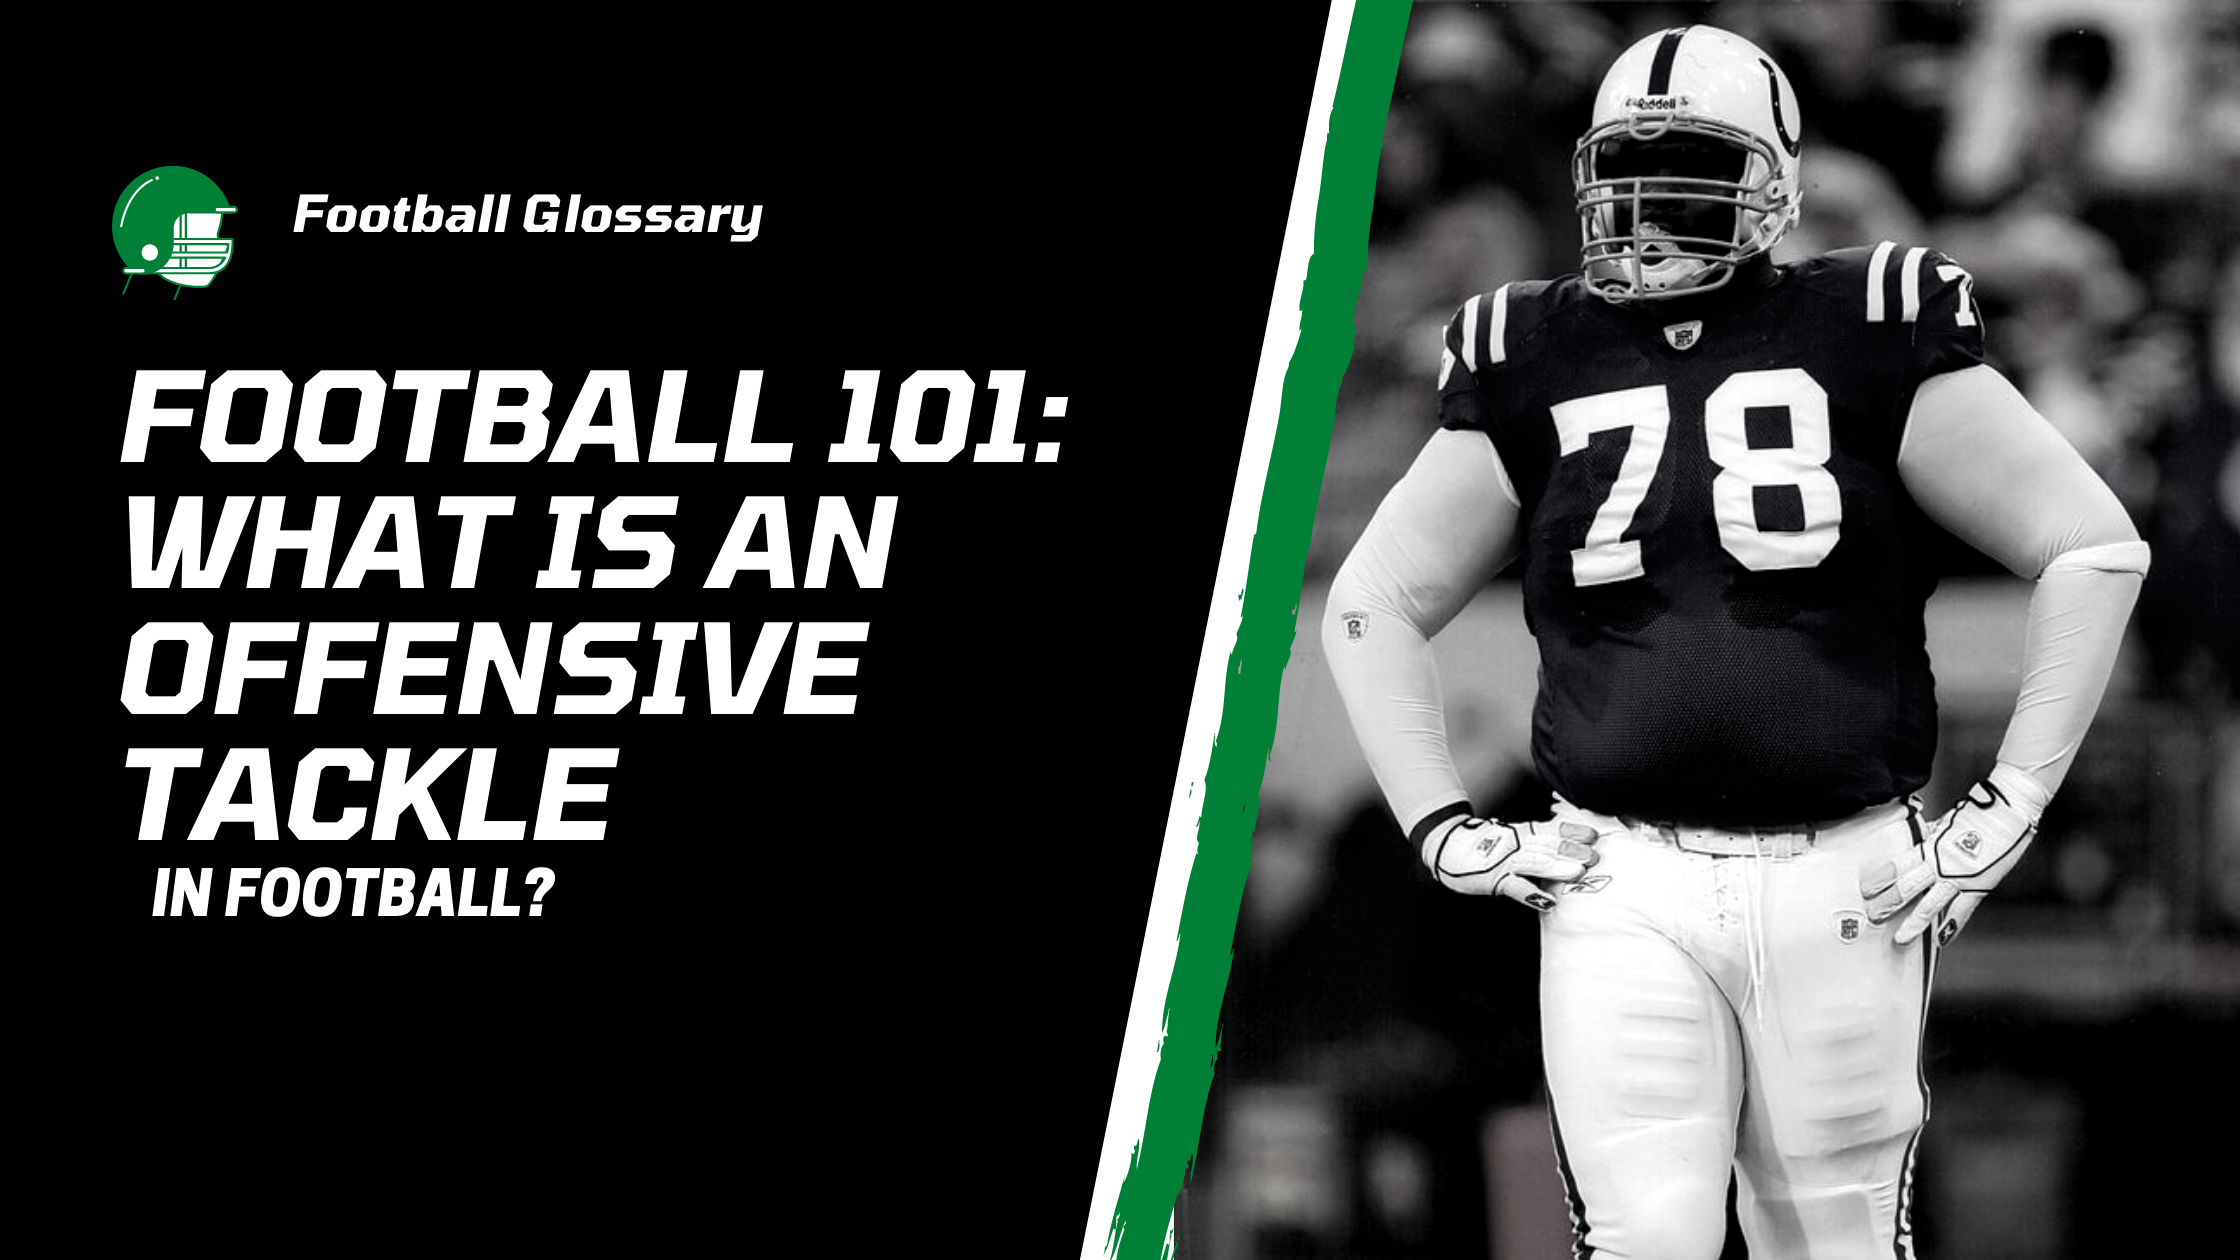 What is an offensive tackle in football?